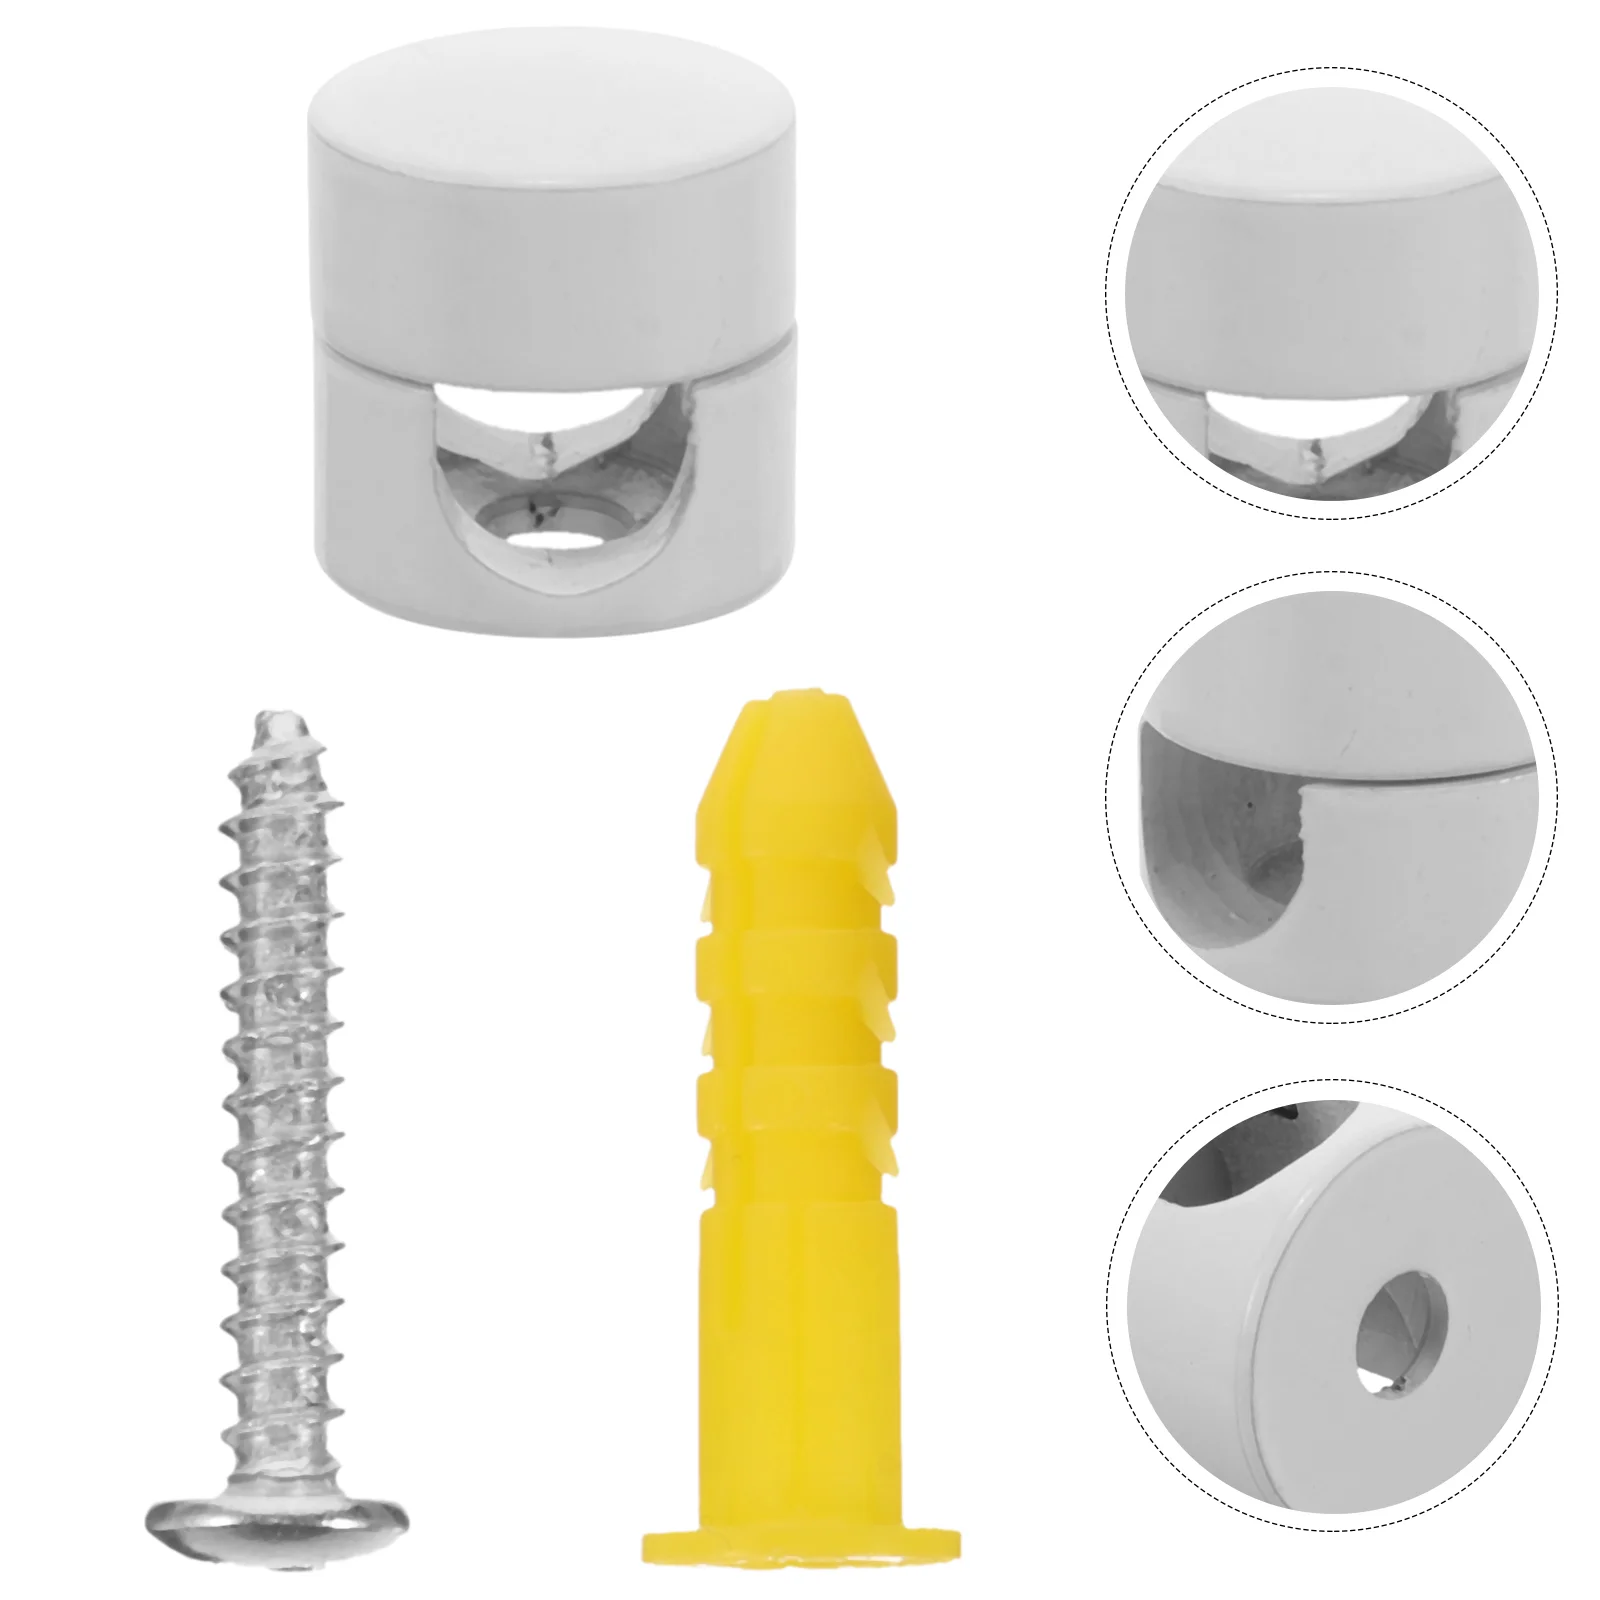 

4 Pcs Chandelier Wire Buckle DIY Cable Glands Cord Clips Grips Securing Fixing Aluminum Strain Relief Thread Locker